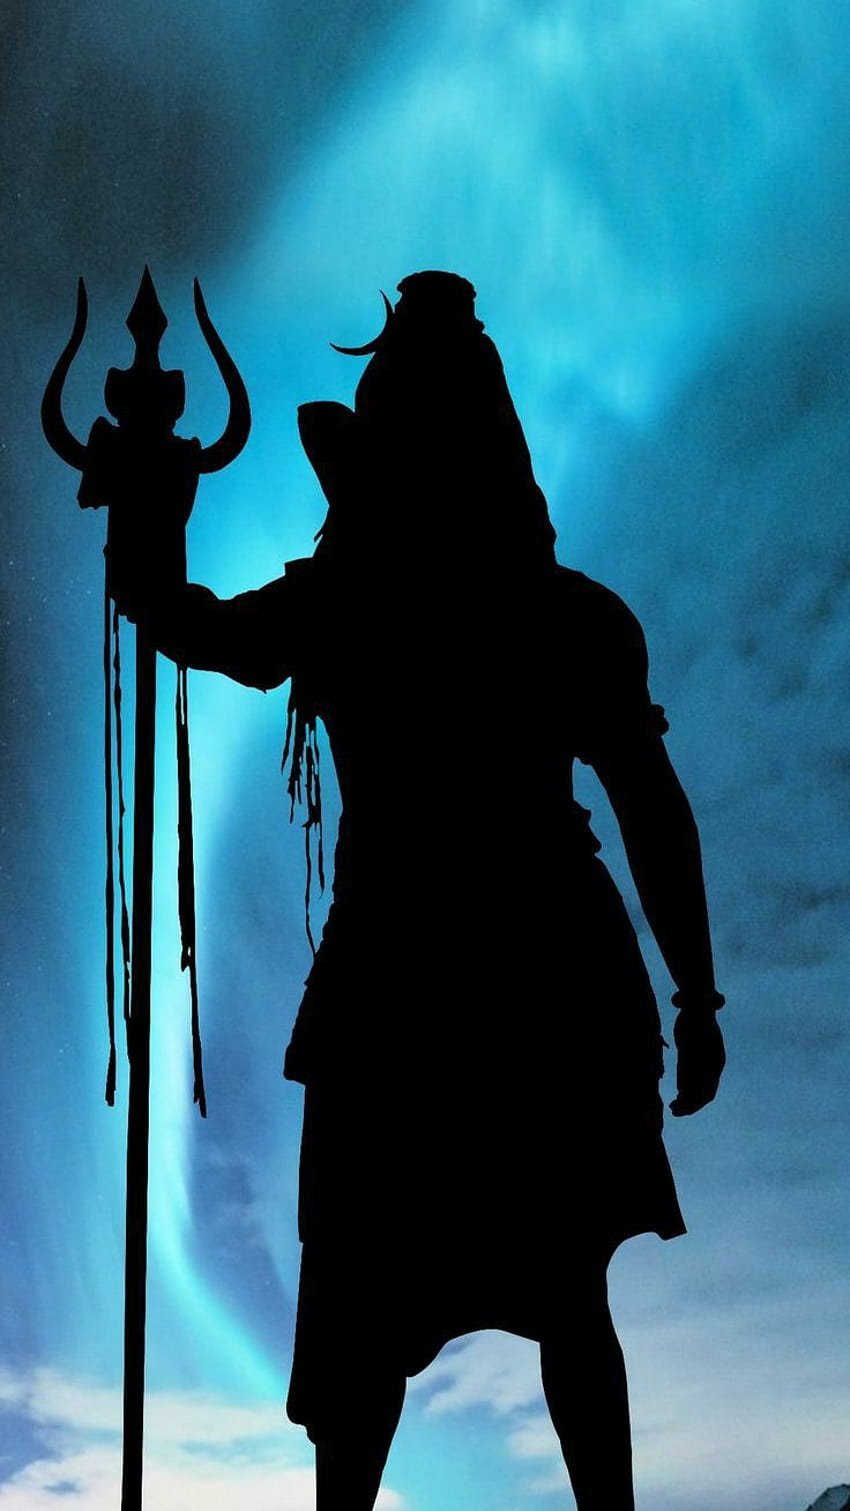 Top 999+ lord shiva shadow images – Amazing Collection lord shiva shadow images Full 4K